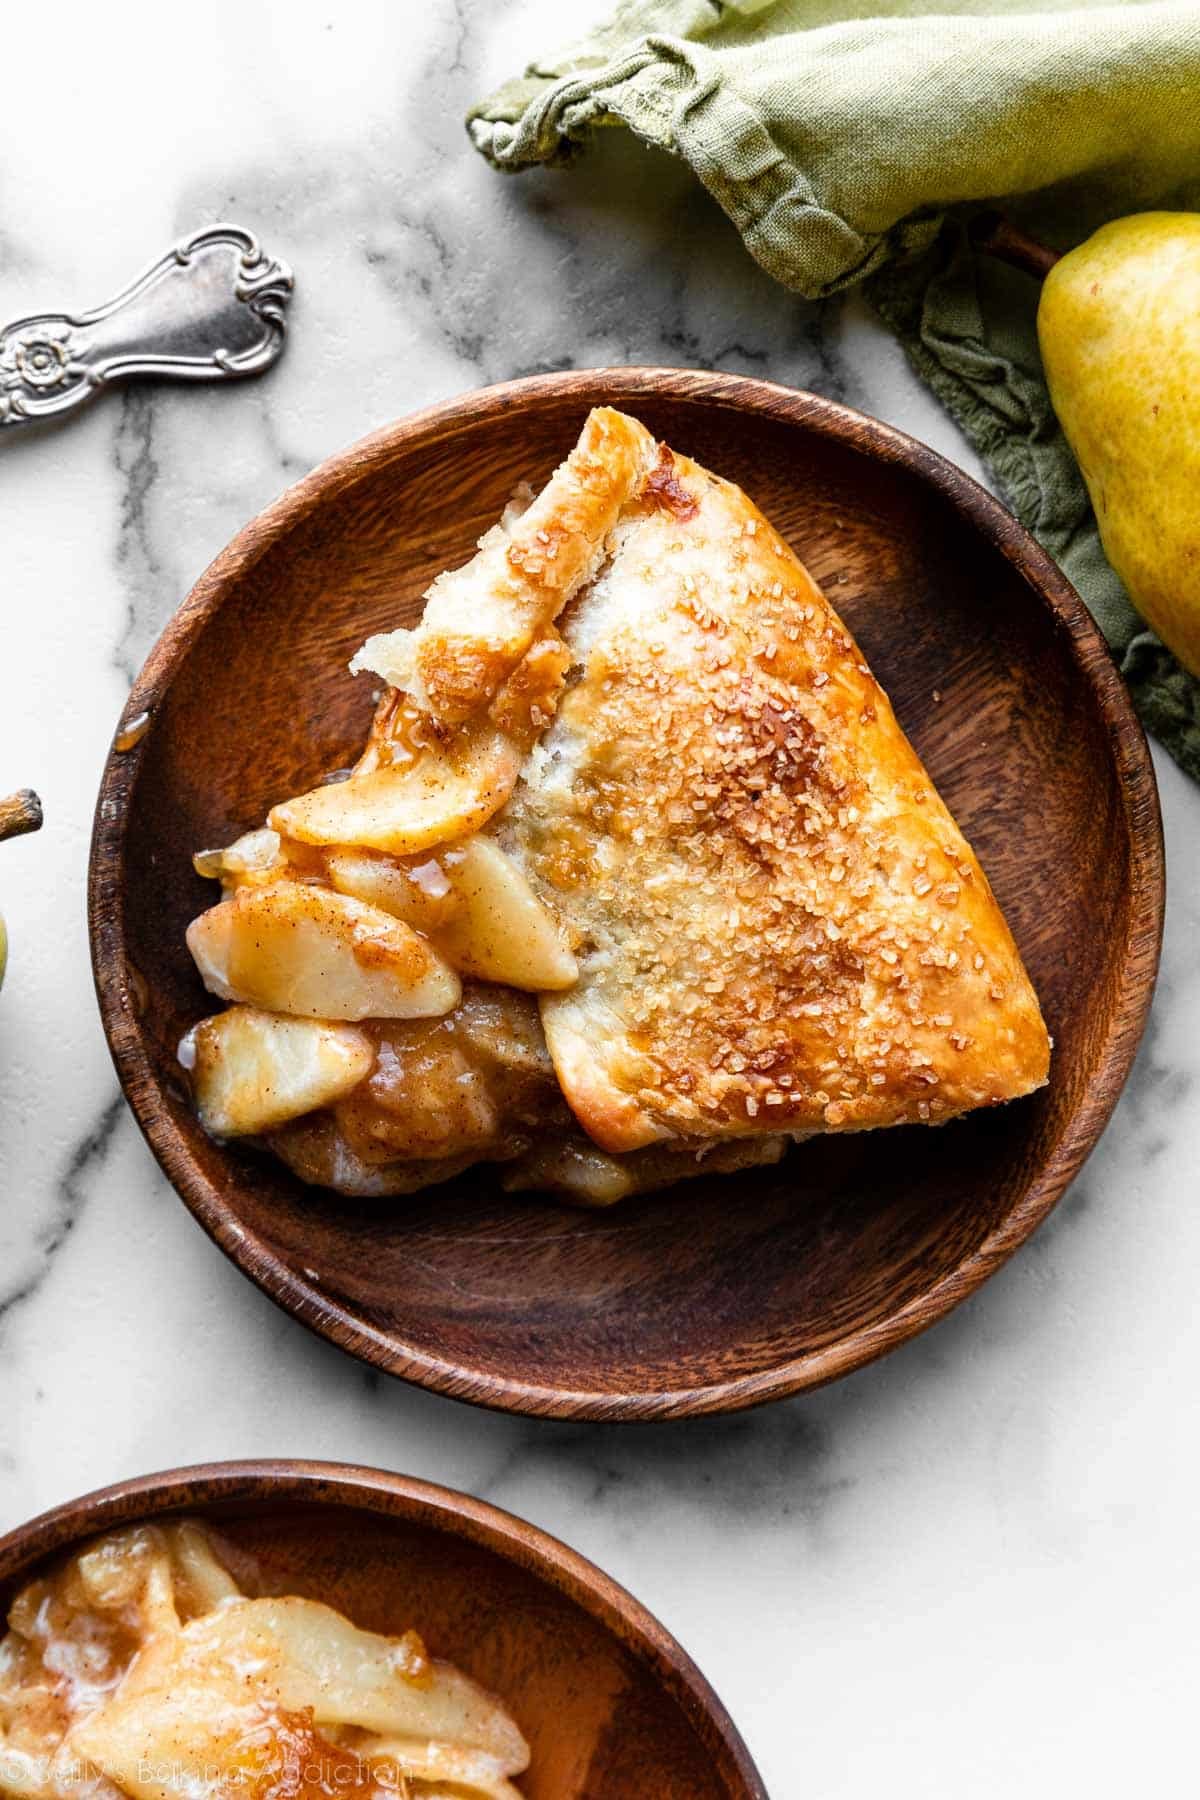 slice of ginger pear galette with golden brown crust on brown wood plate.